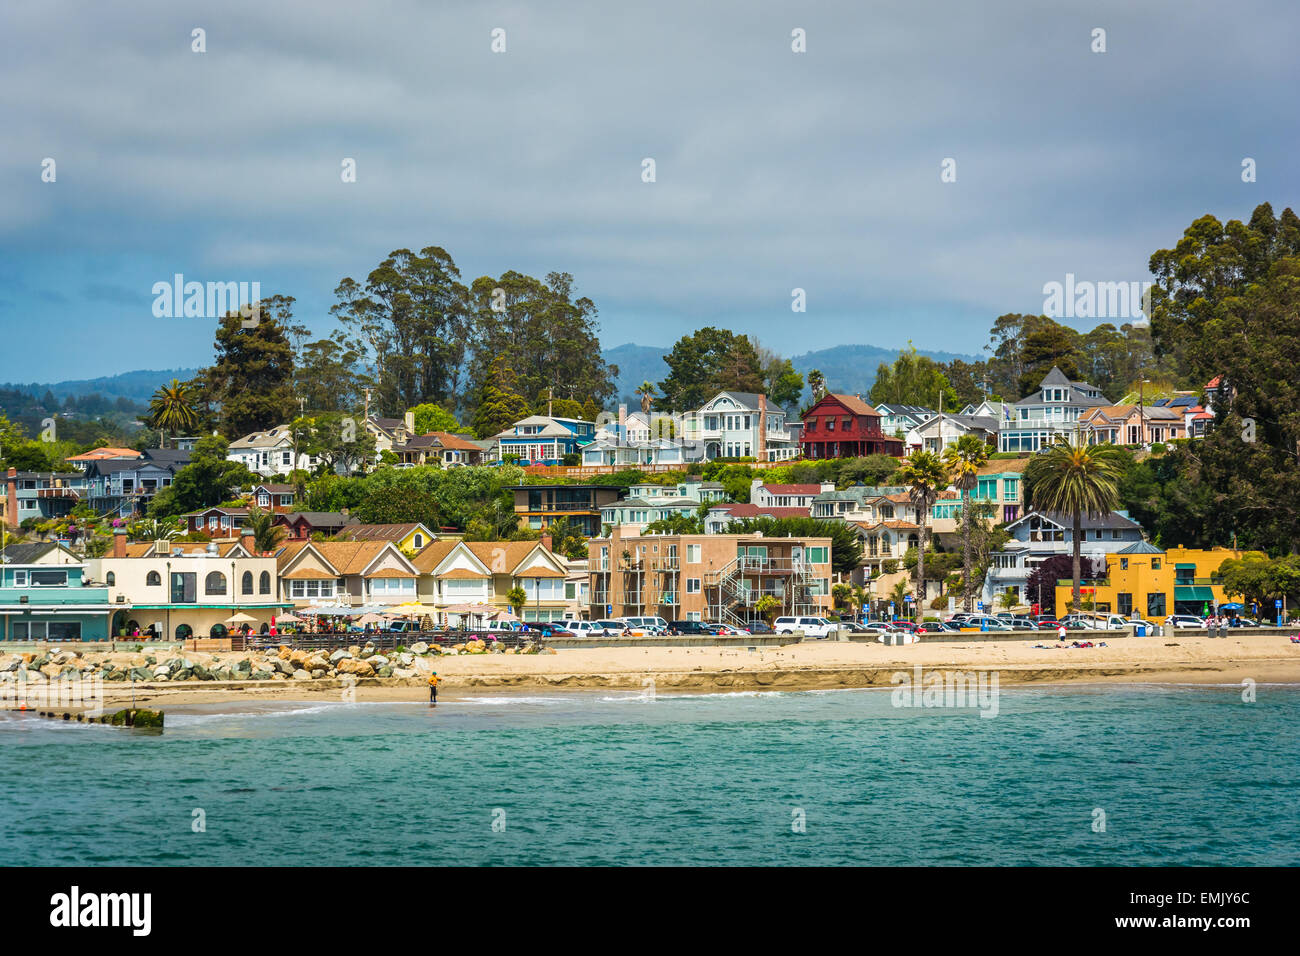 View of the beach in Capitola, California. Stock Photo